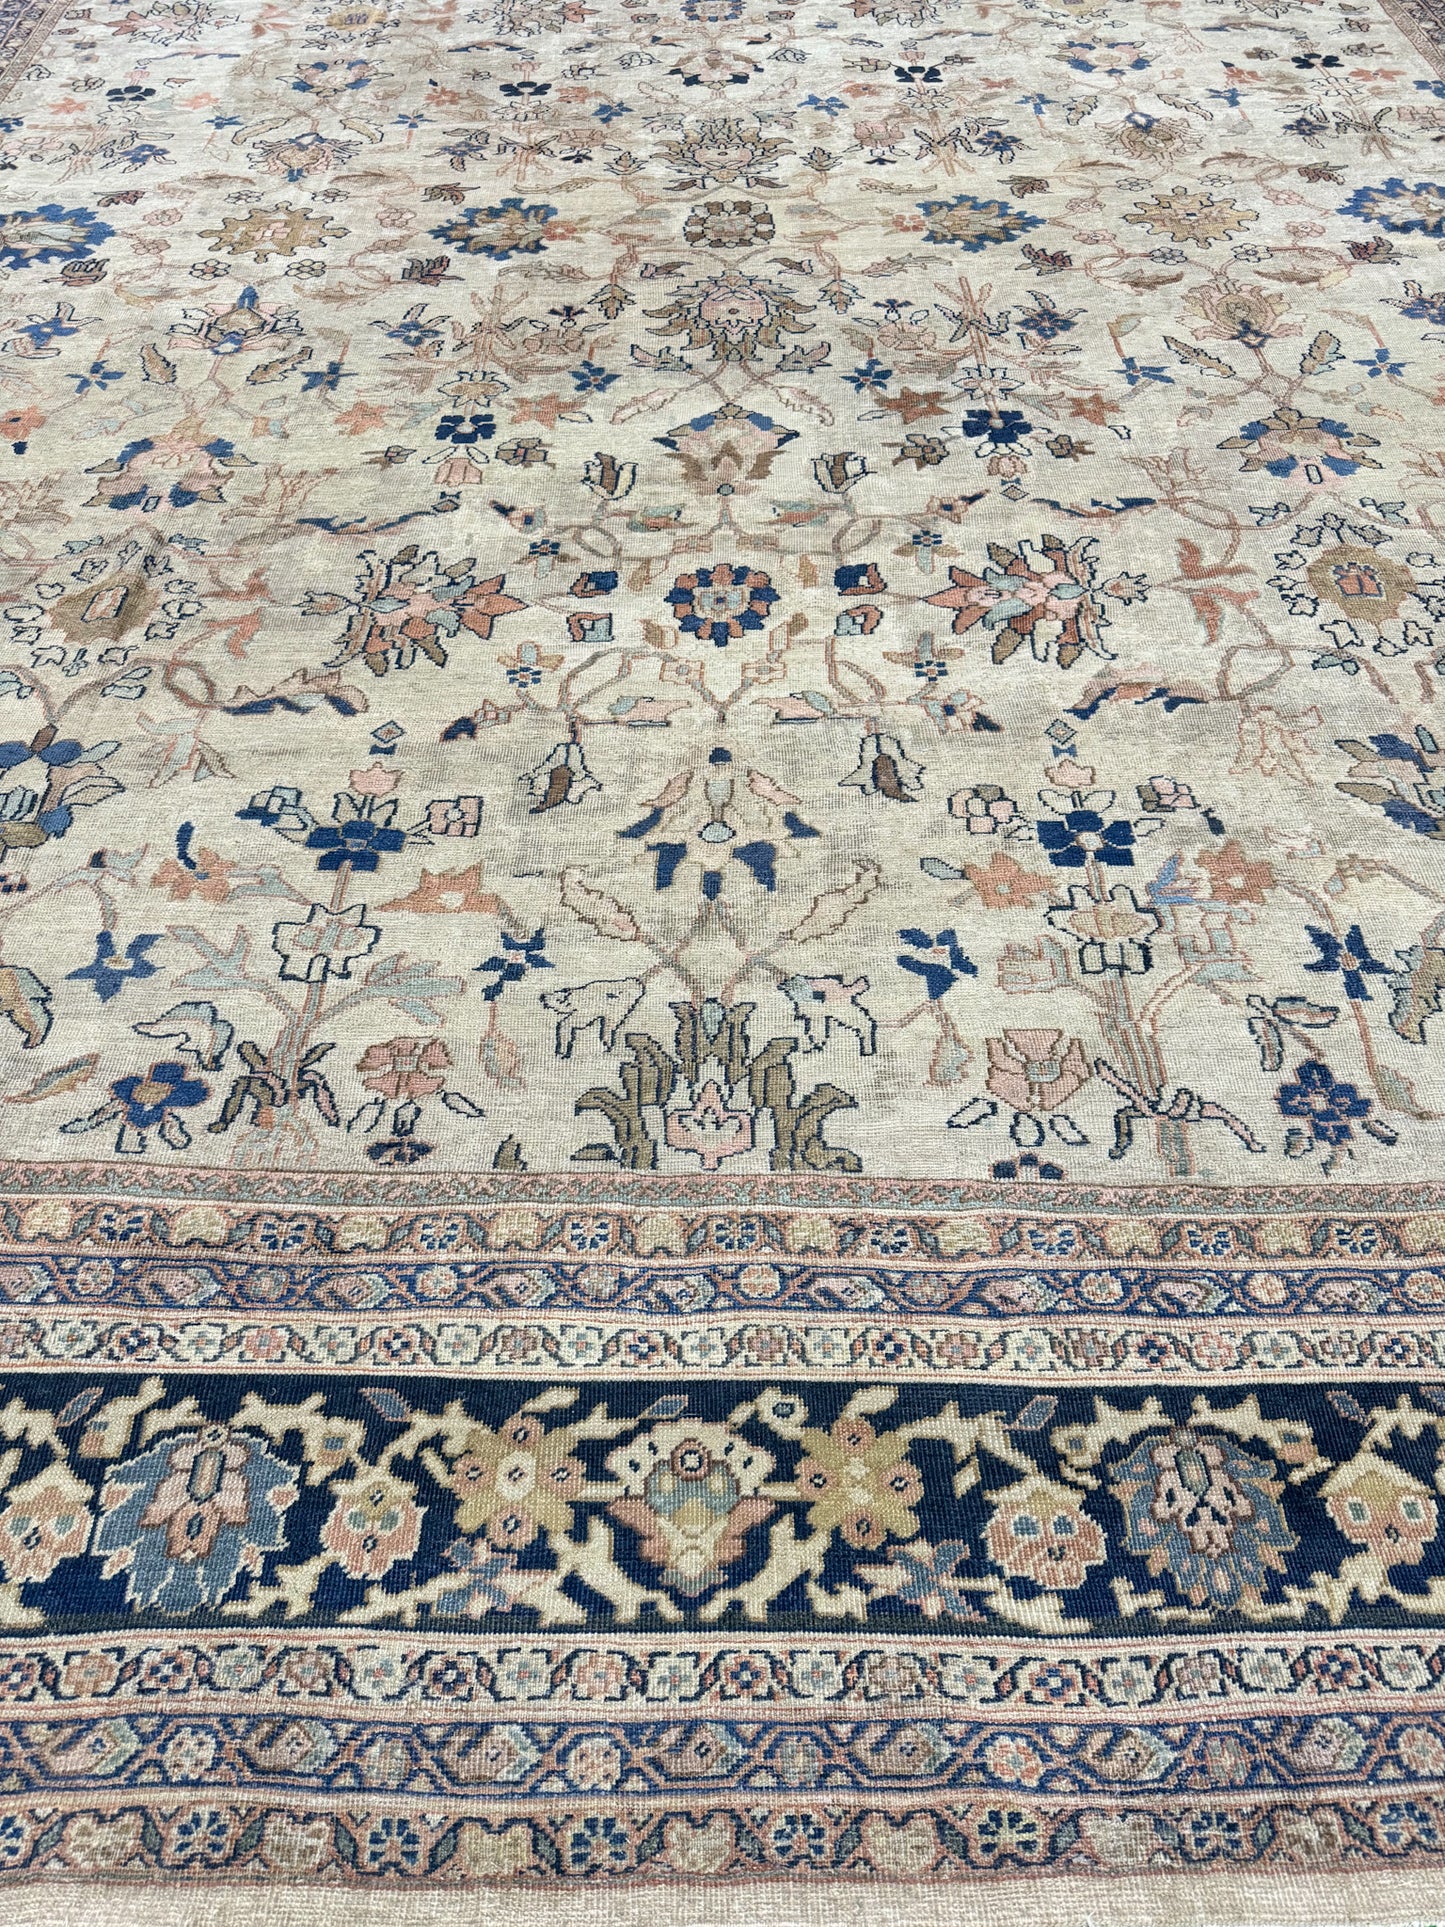 Antique Persian Sultanabad Rug